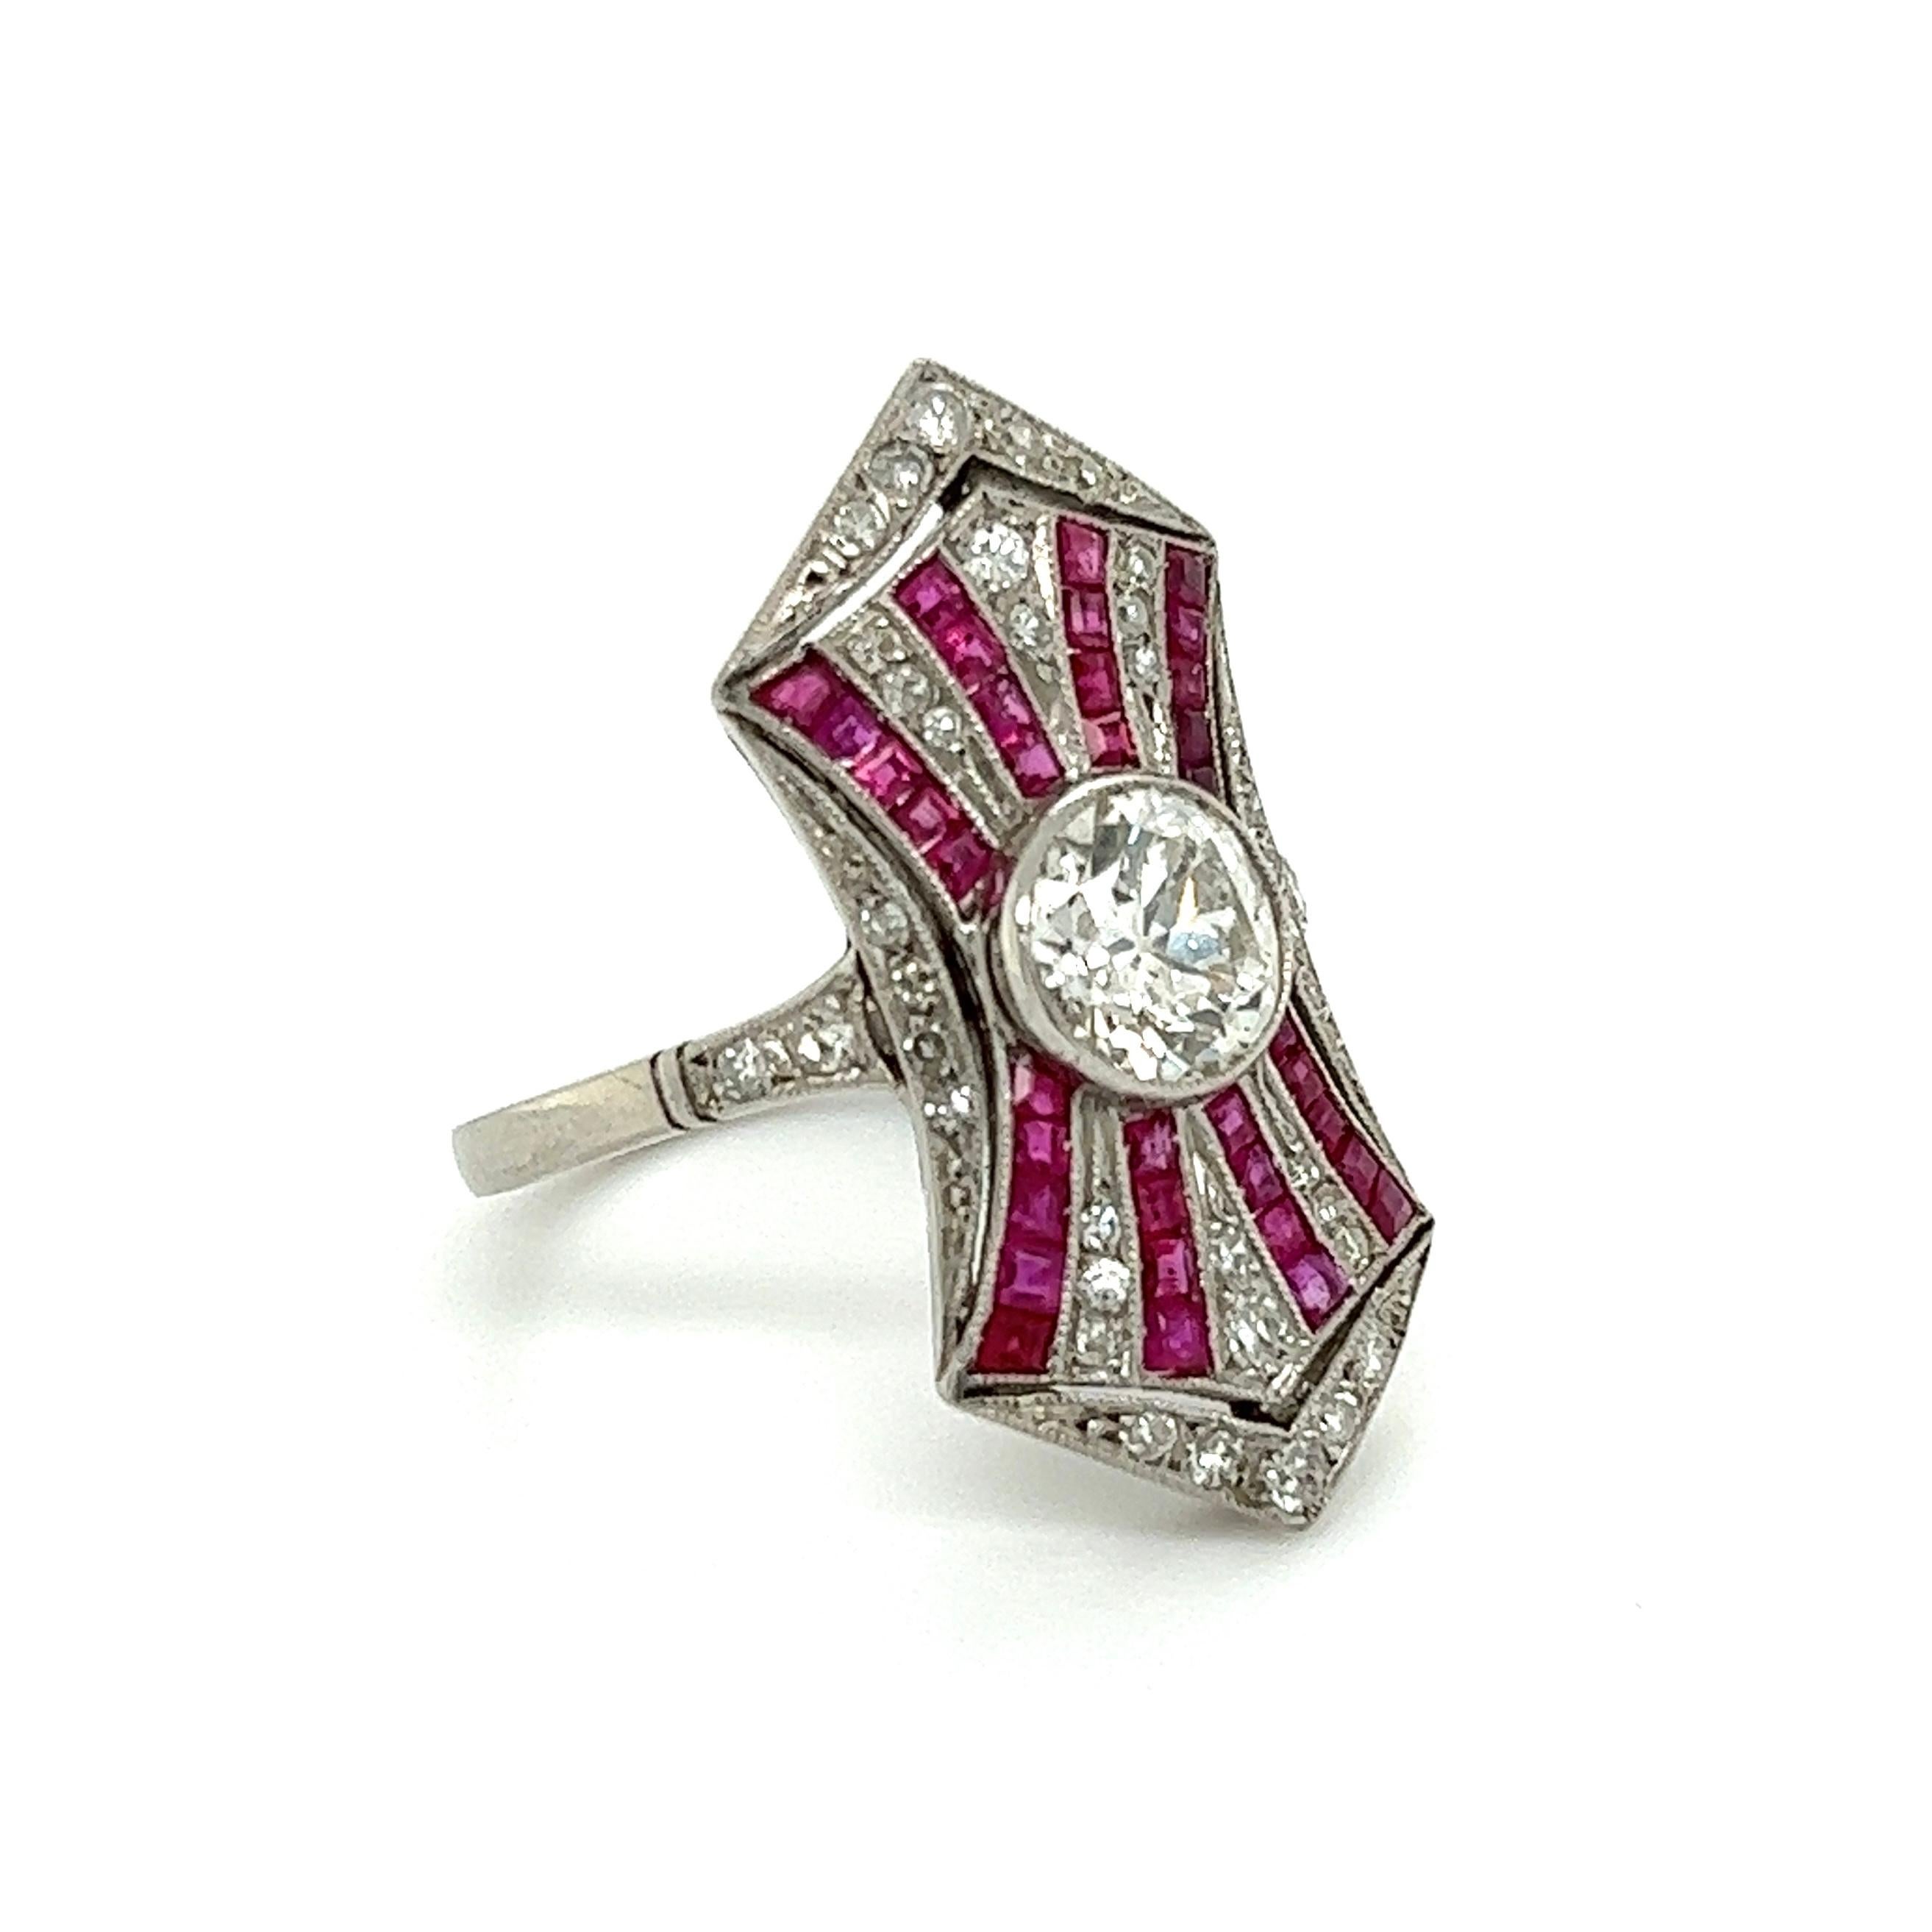 Simply Beautiful! Diamond and Ruby Art Deco Revival Platinum Cocktail Ring. Centering a securely nestled Hand set Old European-cut Diamond weighing approx. 1.00 Carat. Surrounded by Rubies approx. 1.30tcw and Diamonds approx. 0.40tcw. Hand crafted